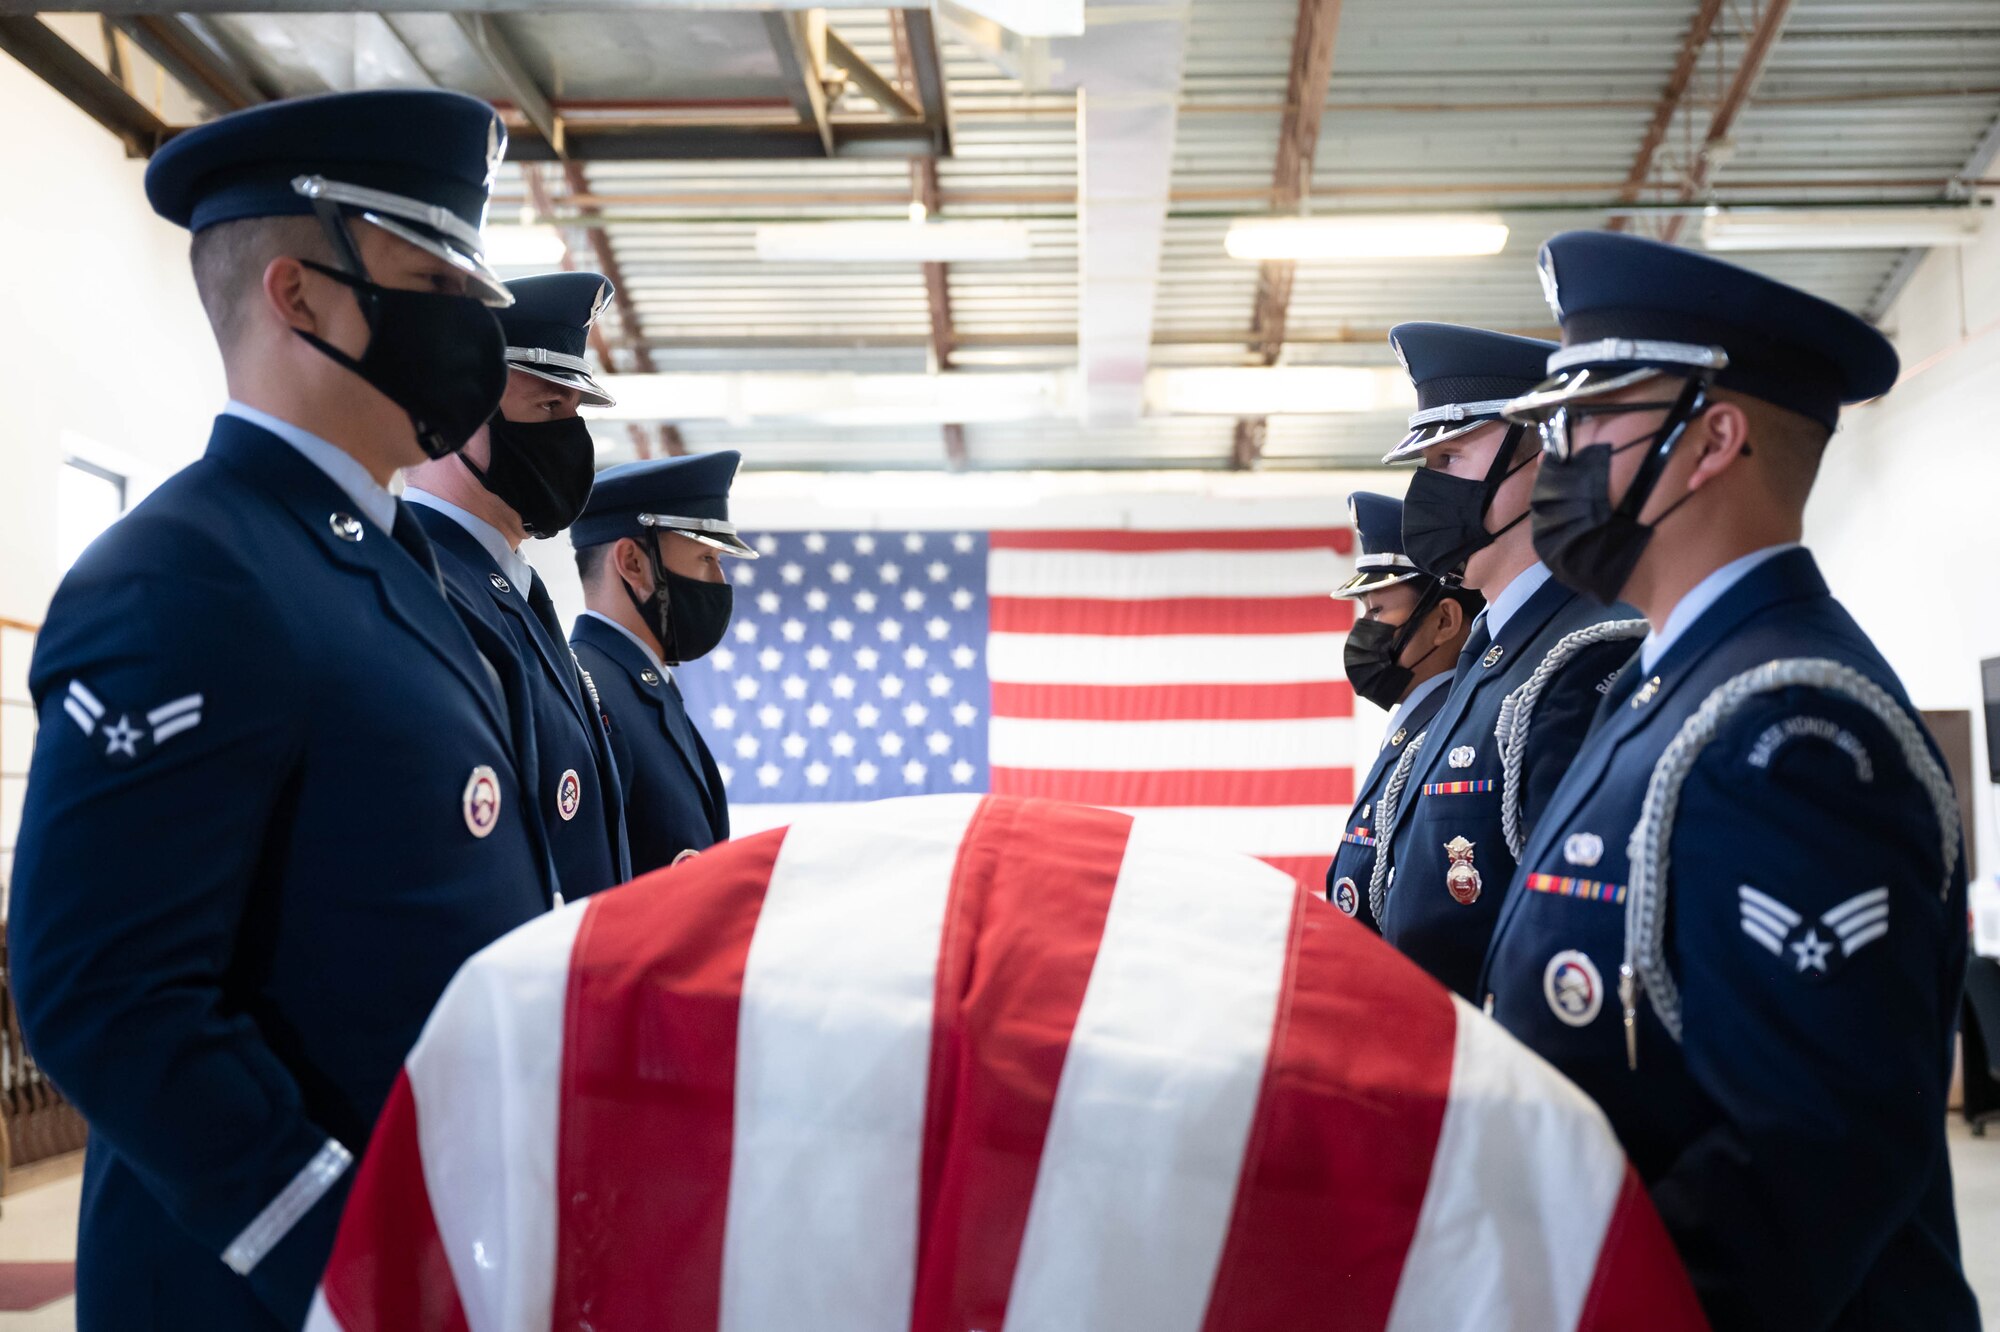 341st Missile Wing Base Honor Guard Airmen practice pall bearing during training April 13, 2021 at Malmstrom Air Force Base, Mont.